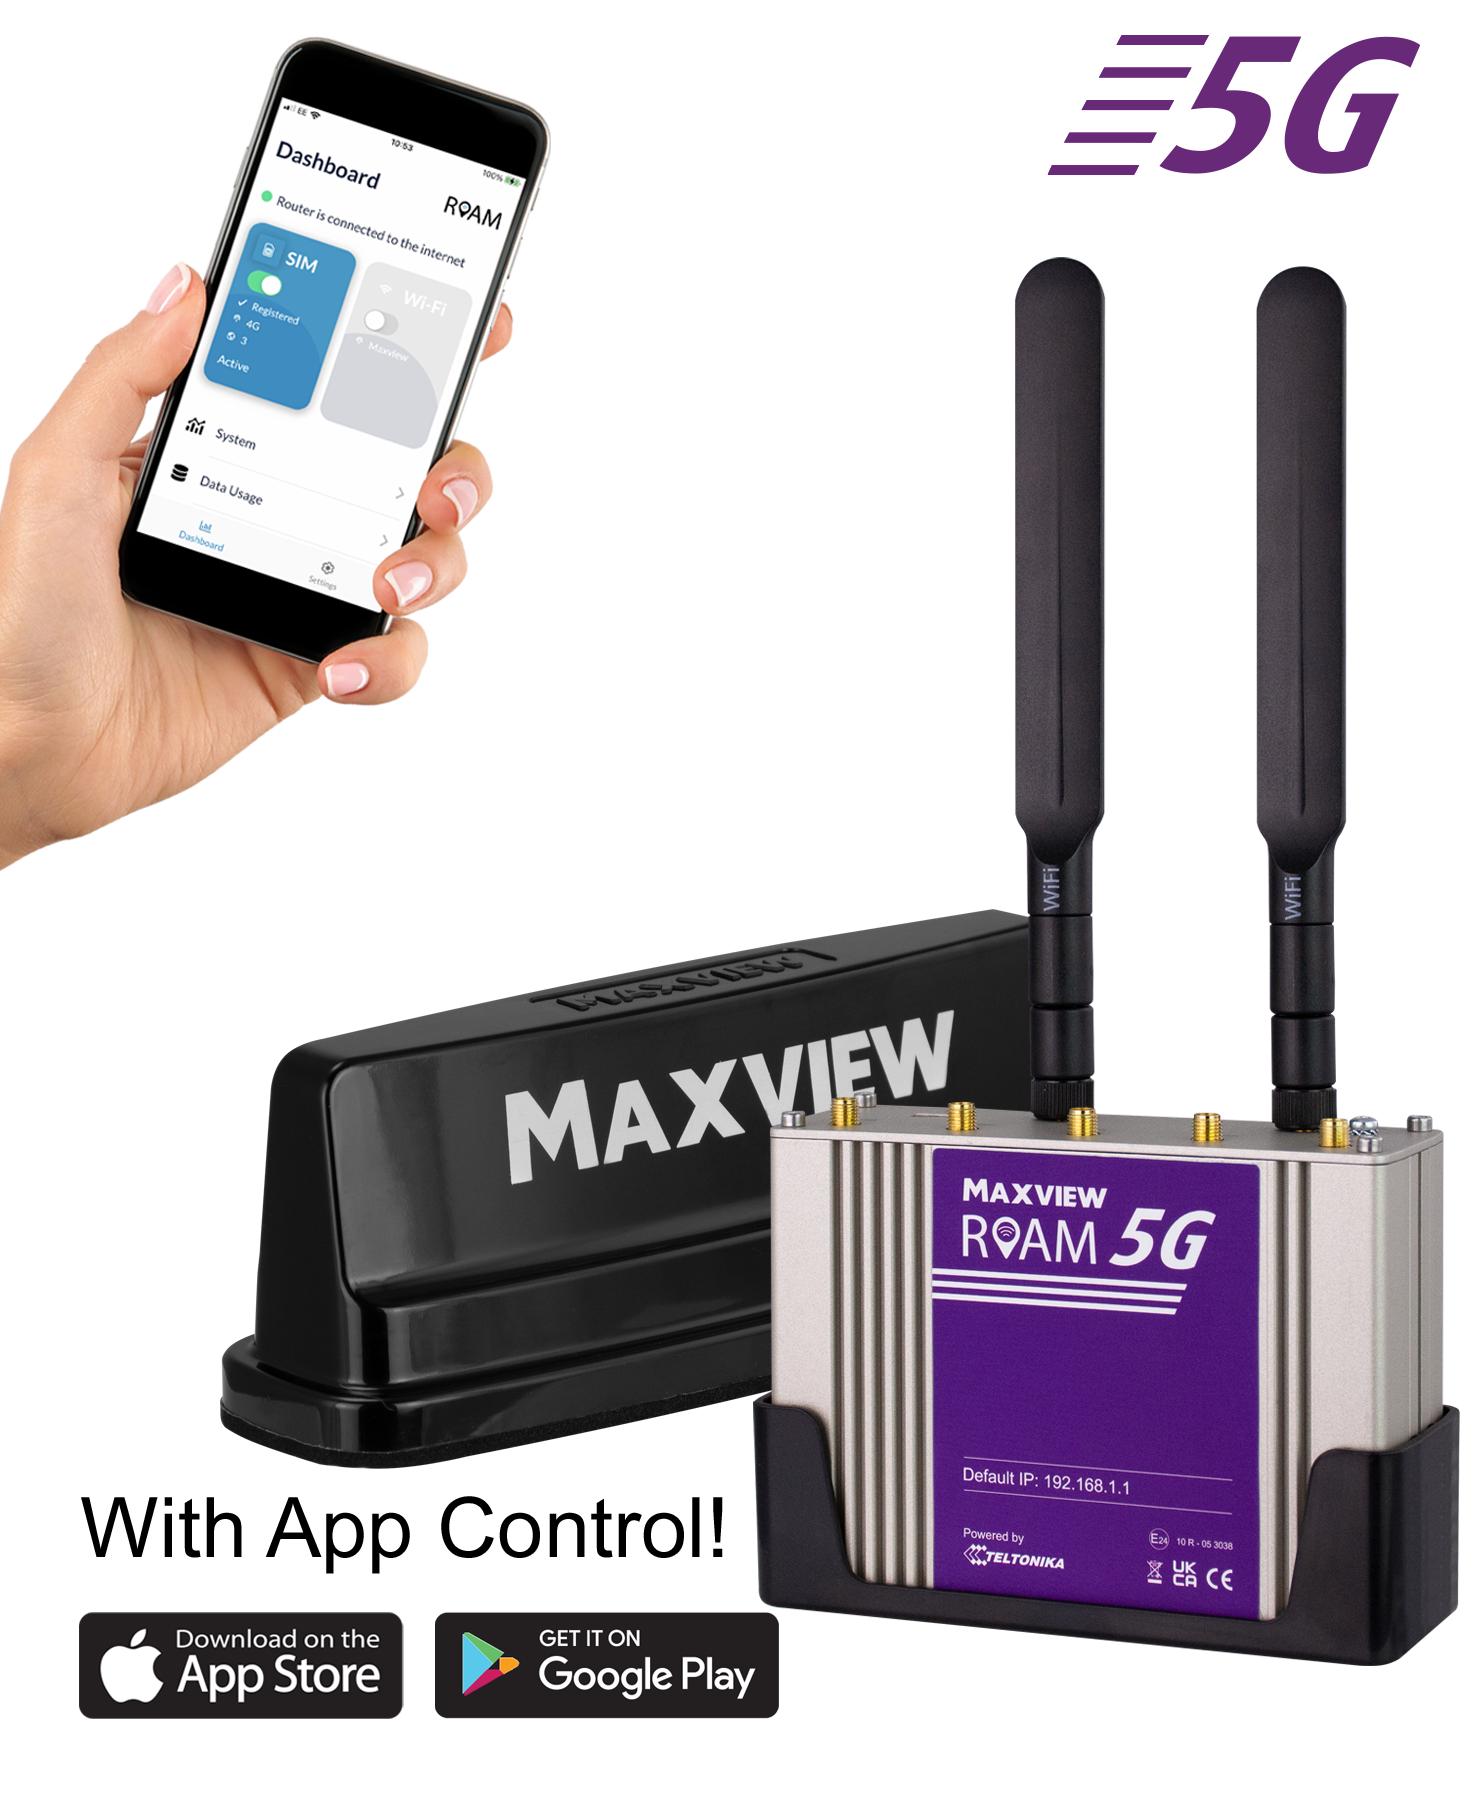 Maxview Roam 5G Campervan Mobile WIFI System